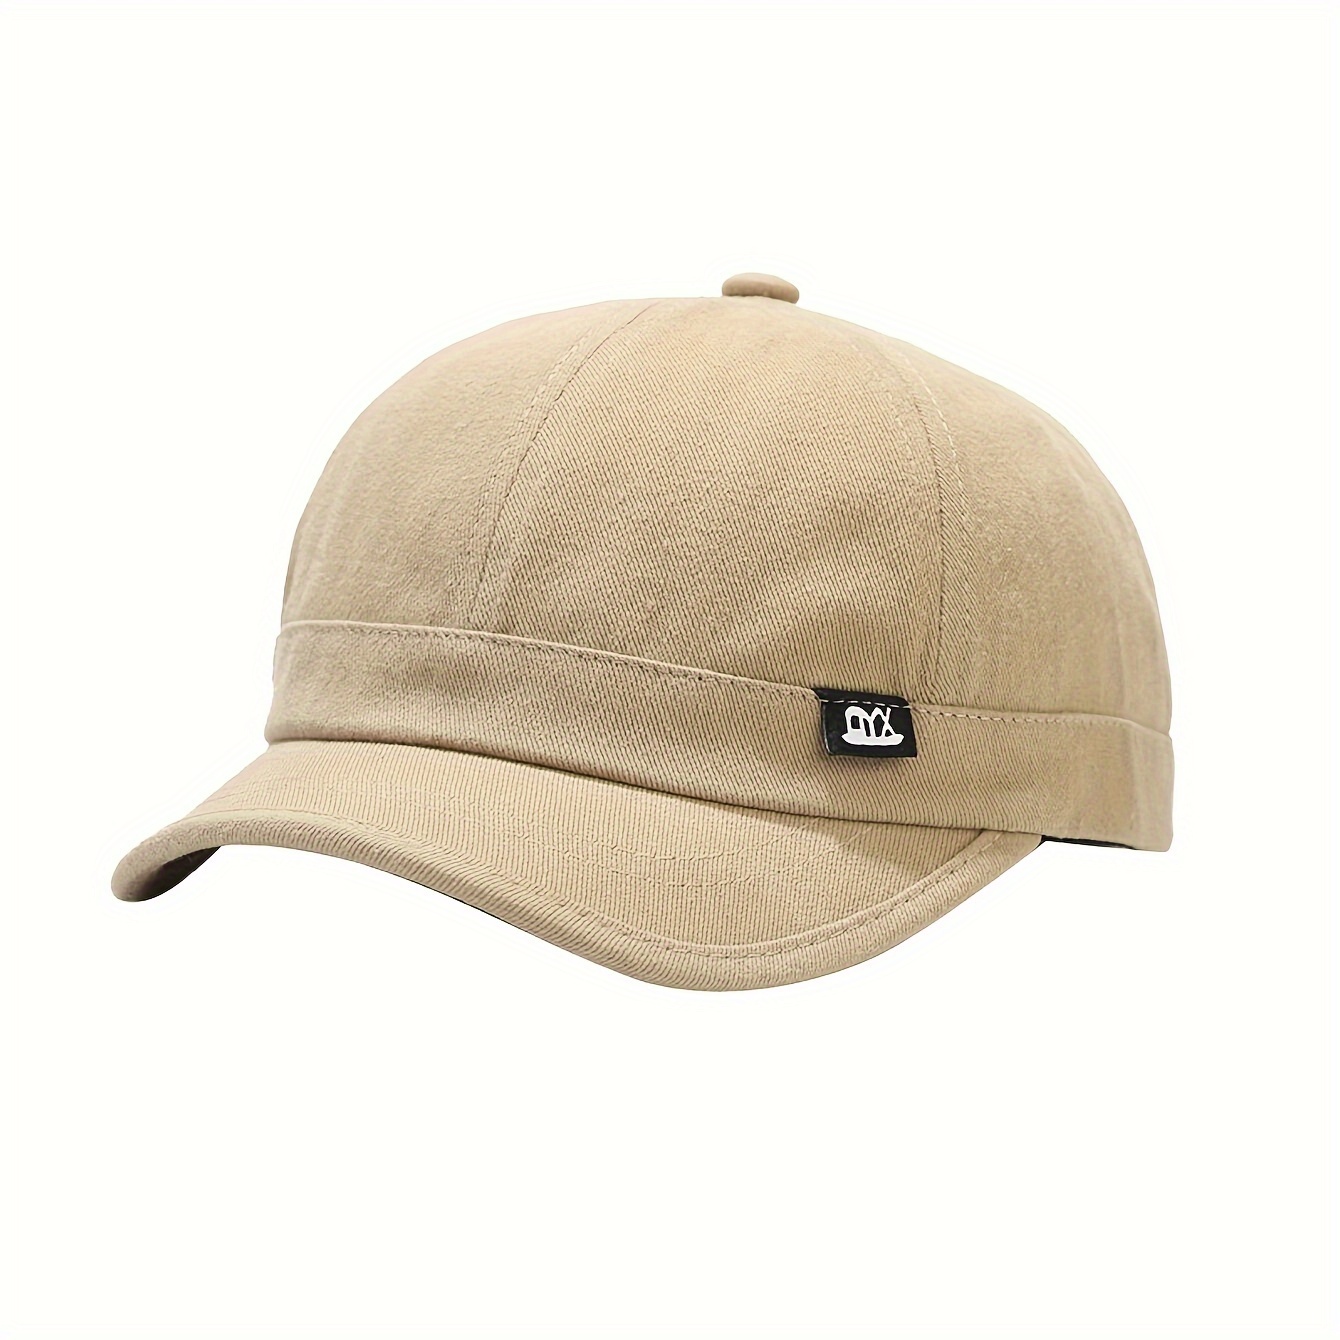 Classic Baseball Cap Vintage Solid Color Casual Hat Lightweight